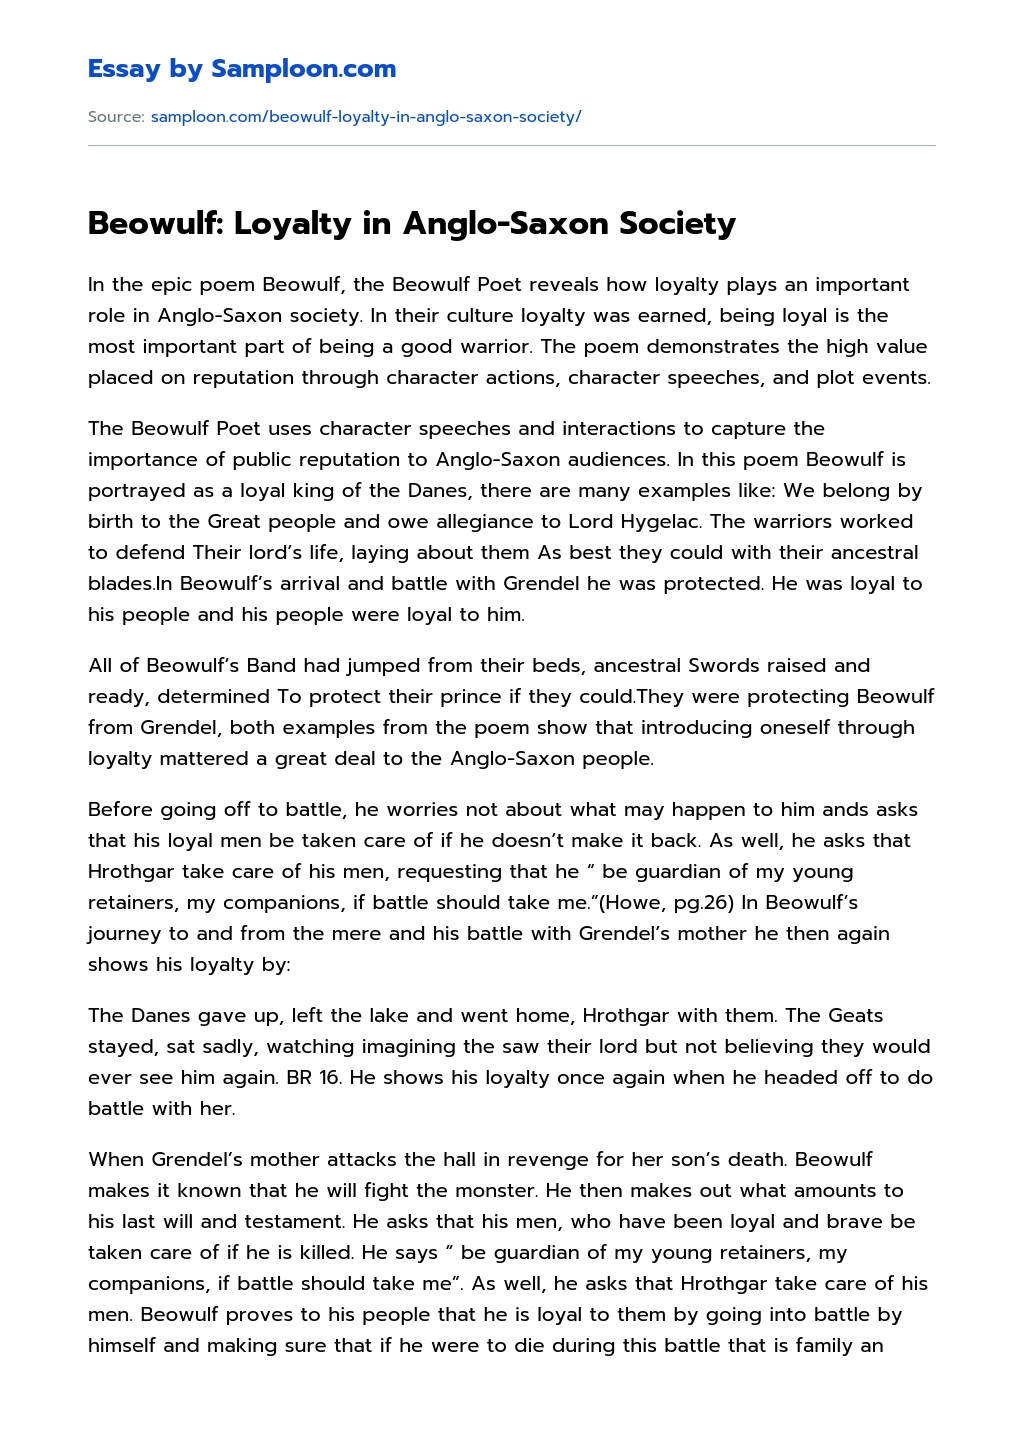 Beowulf: Loyalty in Anglo-Saxon Society Literary Analysis essay